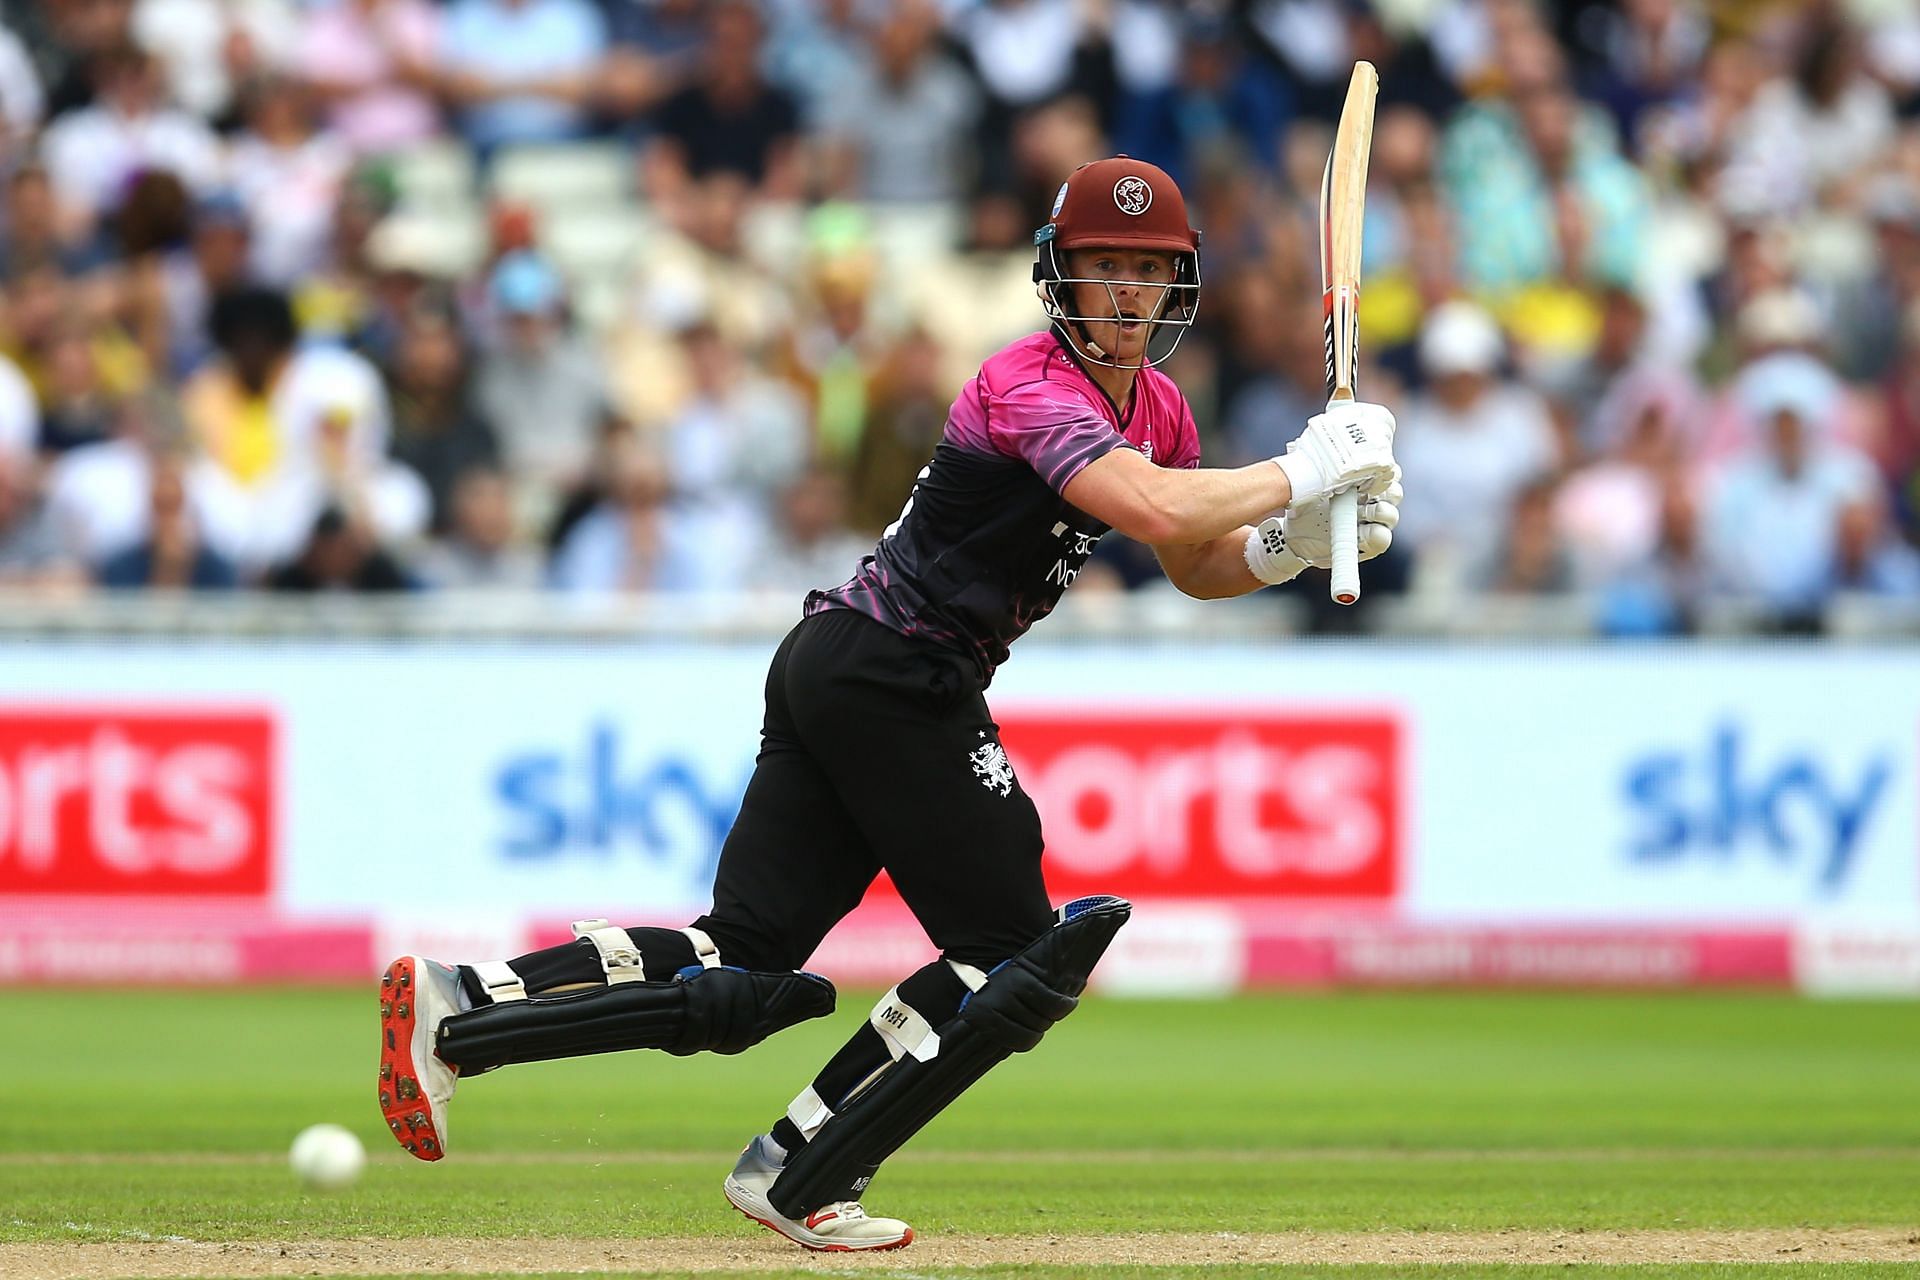 Hampshire Hawks v Somerset: Semi Final - Vitality T20 Blast Finals Day (Image courtesy: Getty Images)